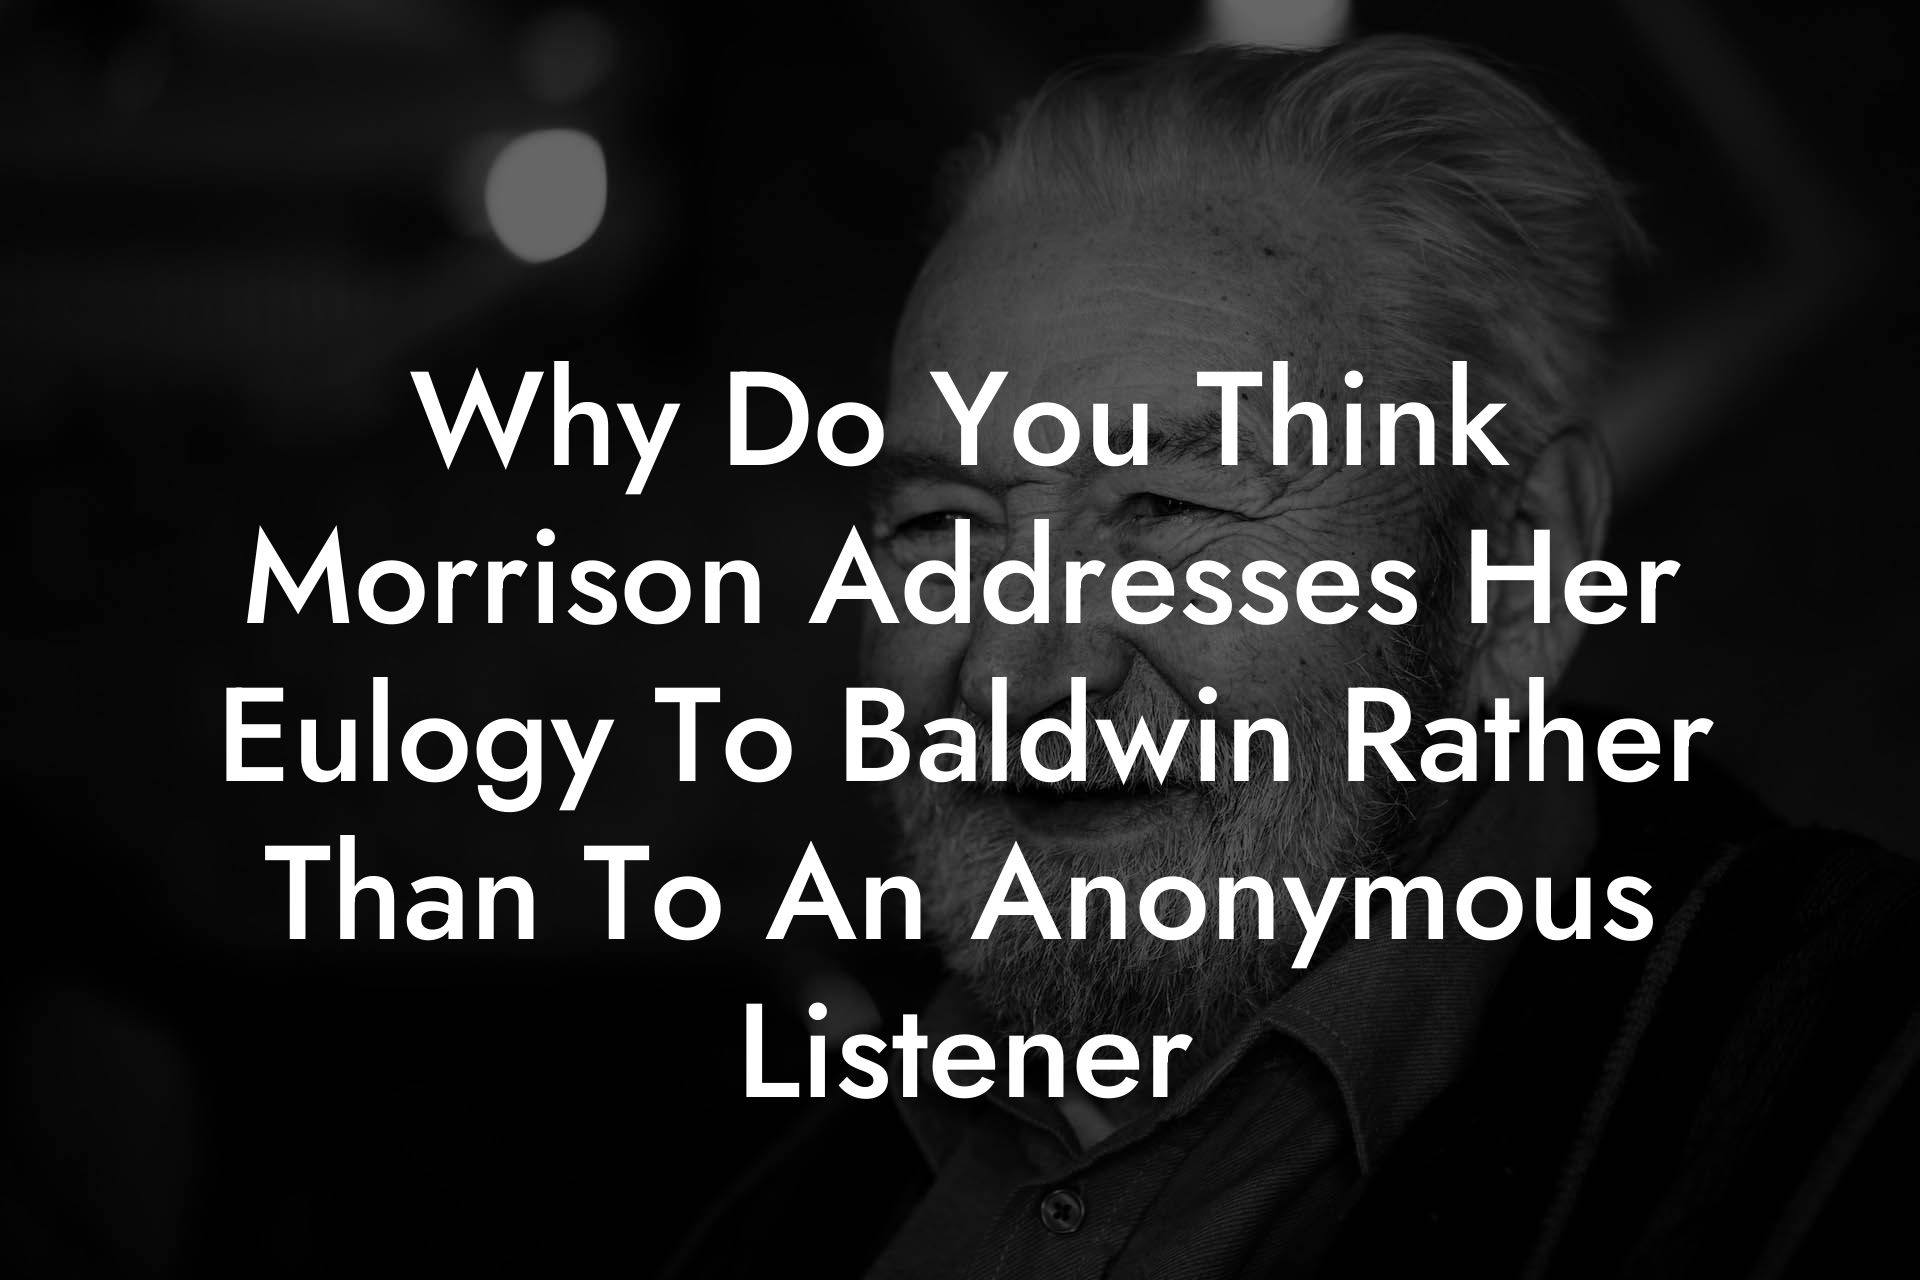 Why Do You Think Morrison Addresses Her Eulogy To Baldwin Rather Than To An Anonymous Listener